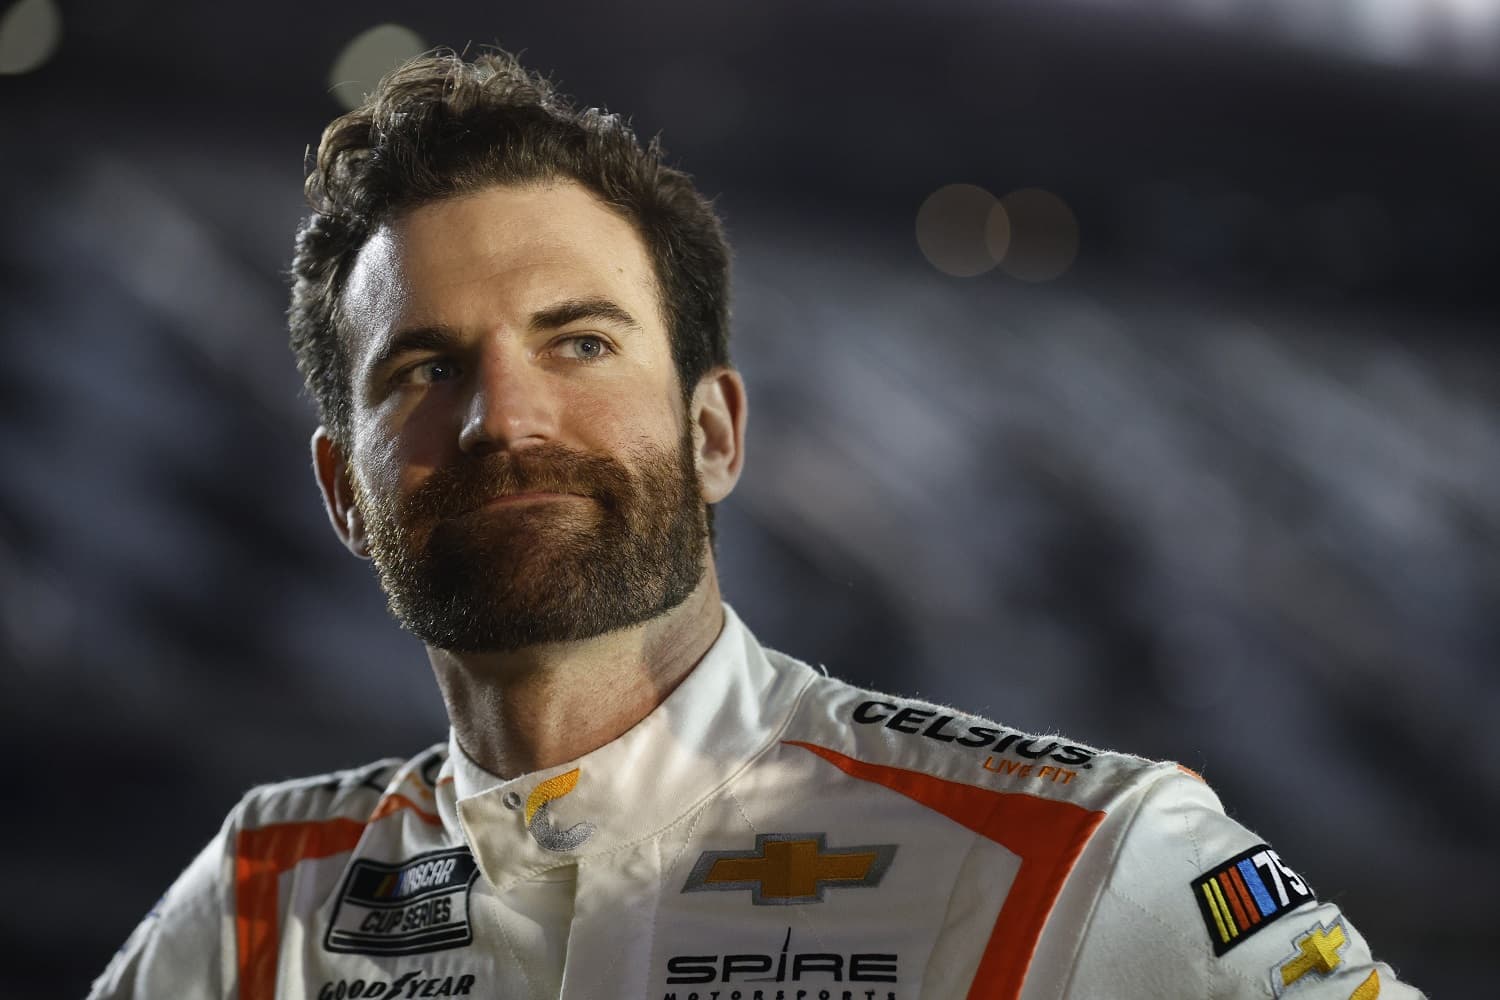 Corey LaJoie looks on during qualifying for the Busch Light Pole at Daytona International Speedway on Feb. 15, 2023.